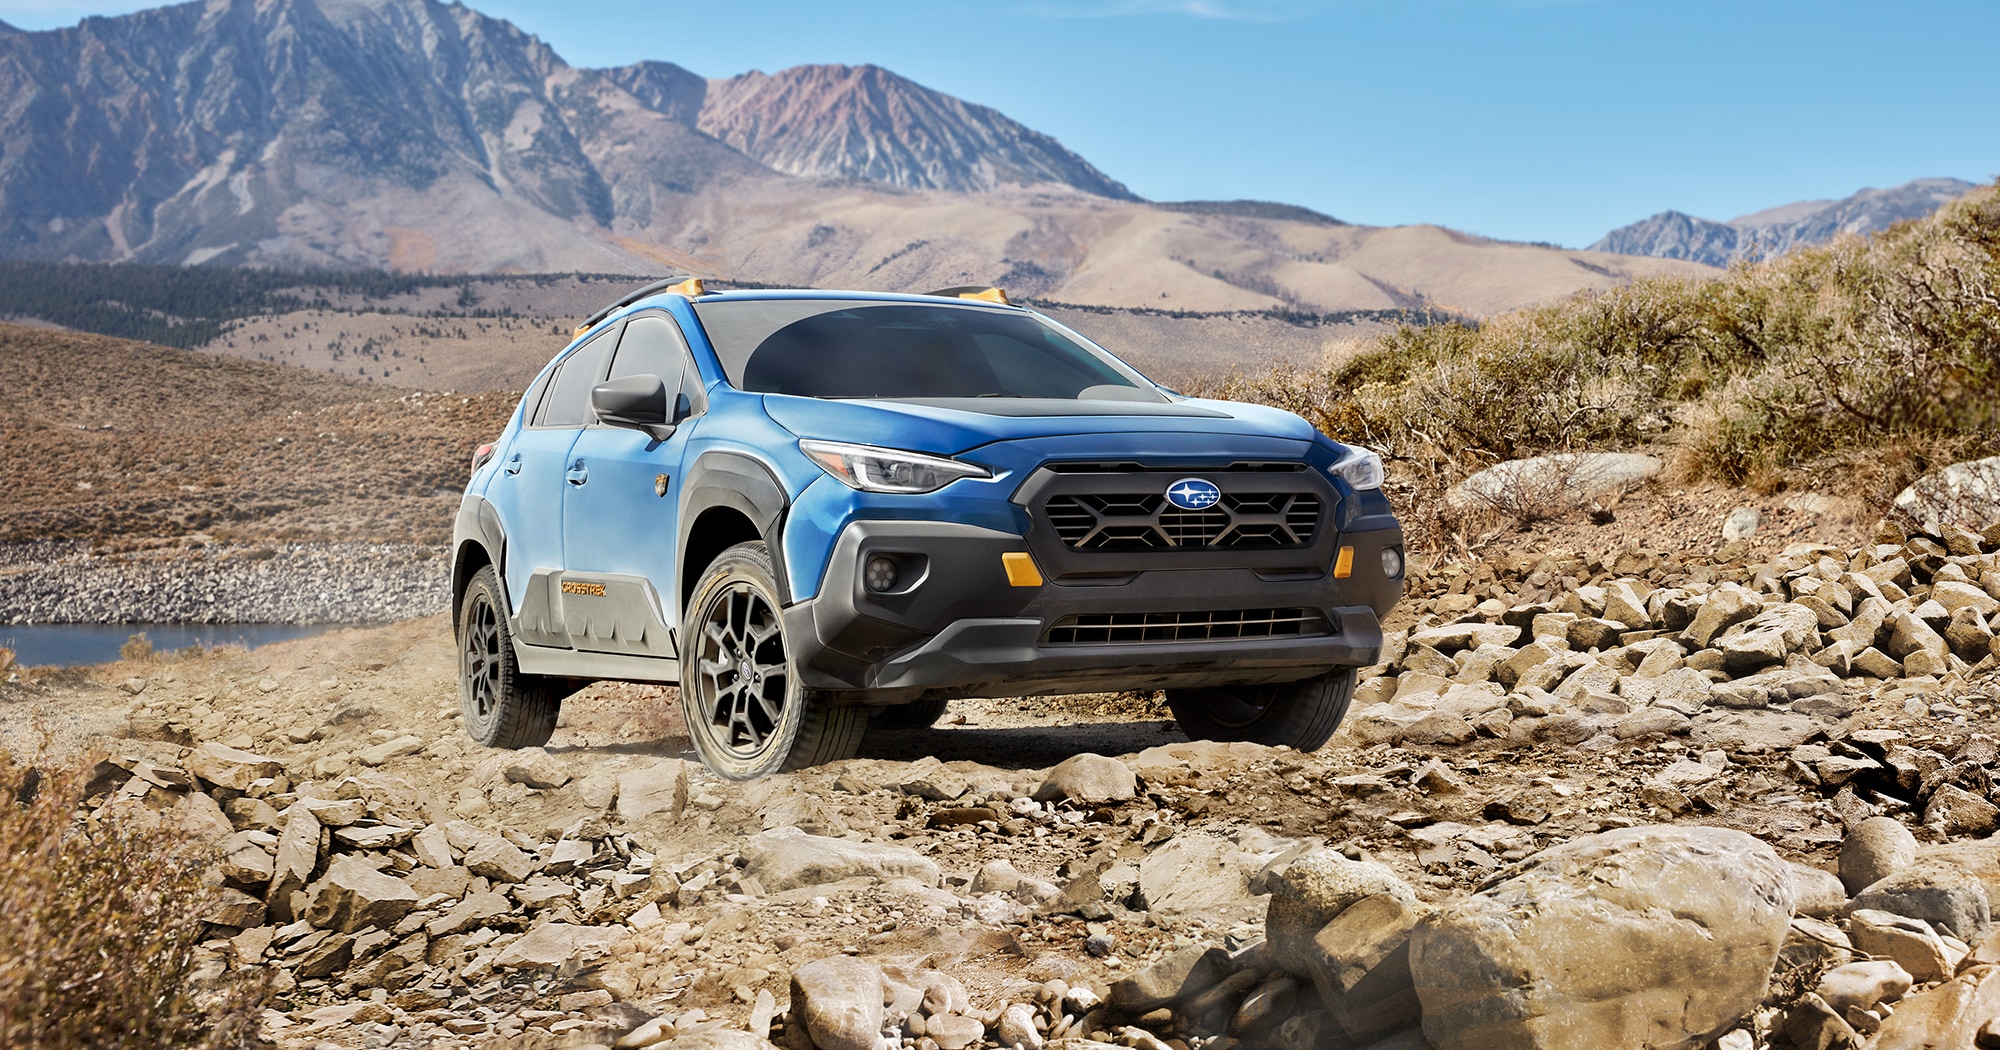  A blue off road Subaru Crosstrek Wilderness SUV parked on rocky terrain with mountains in background